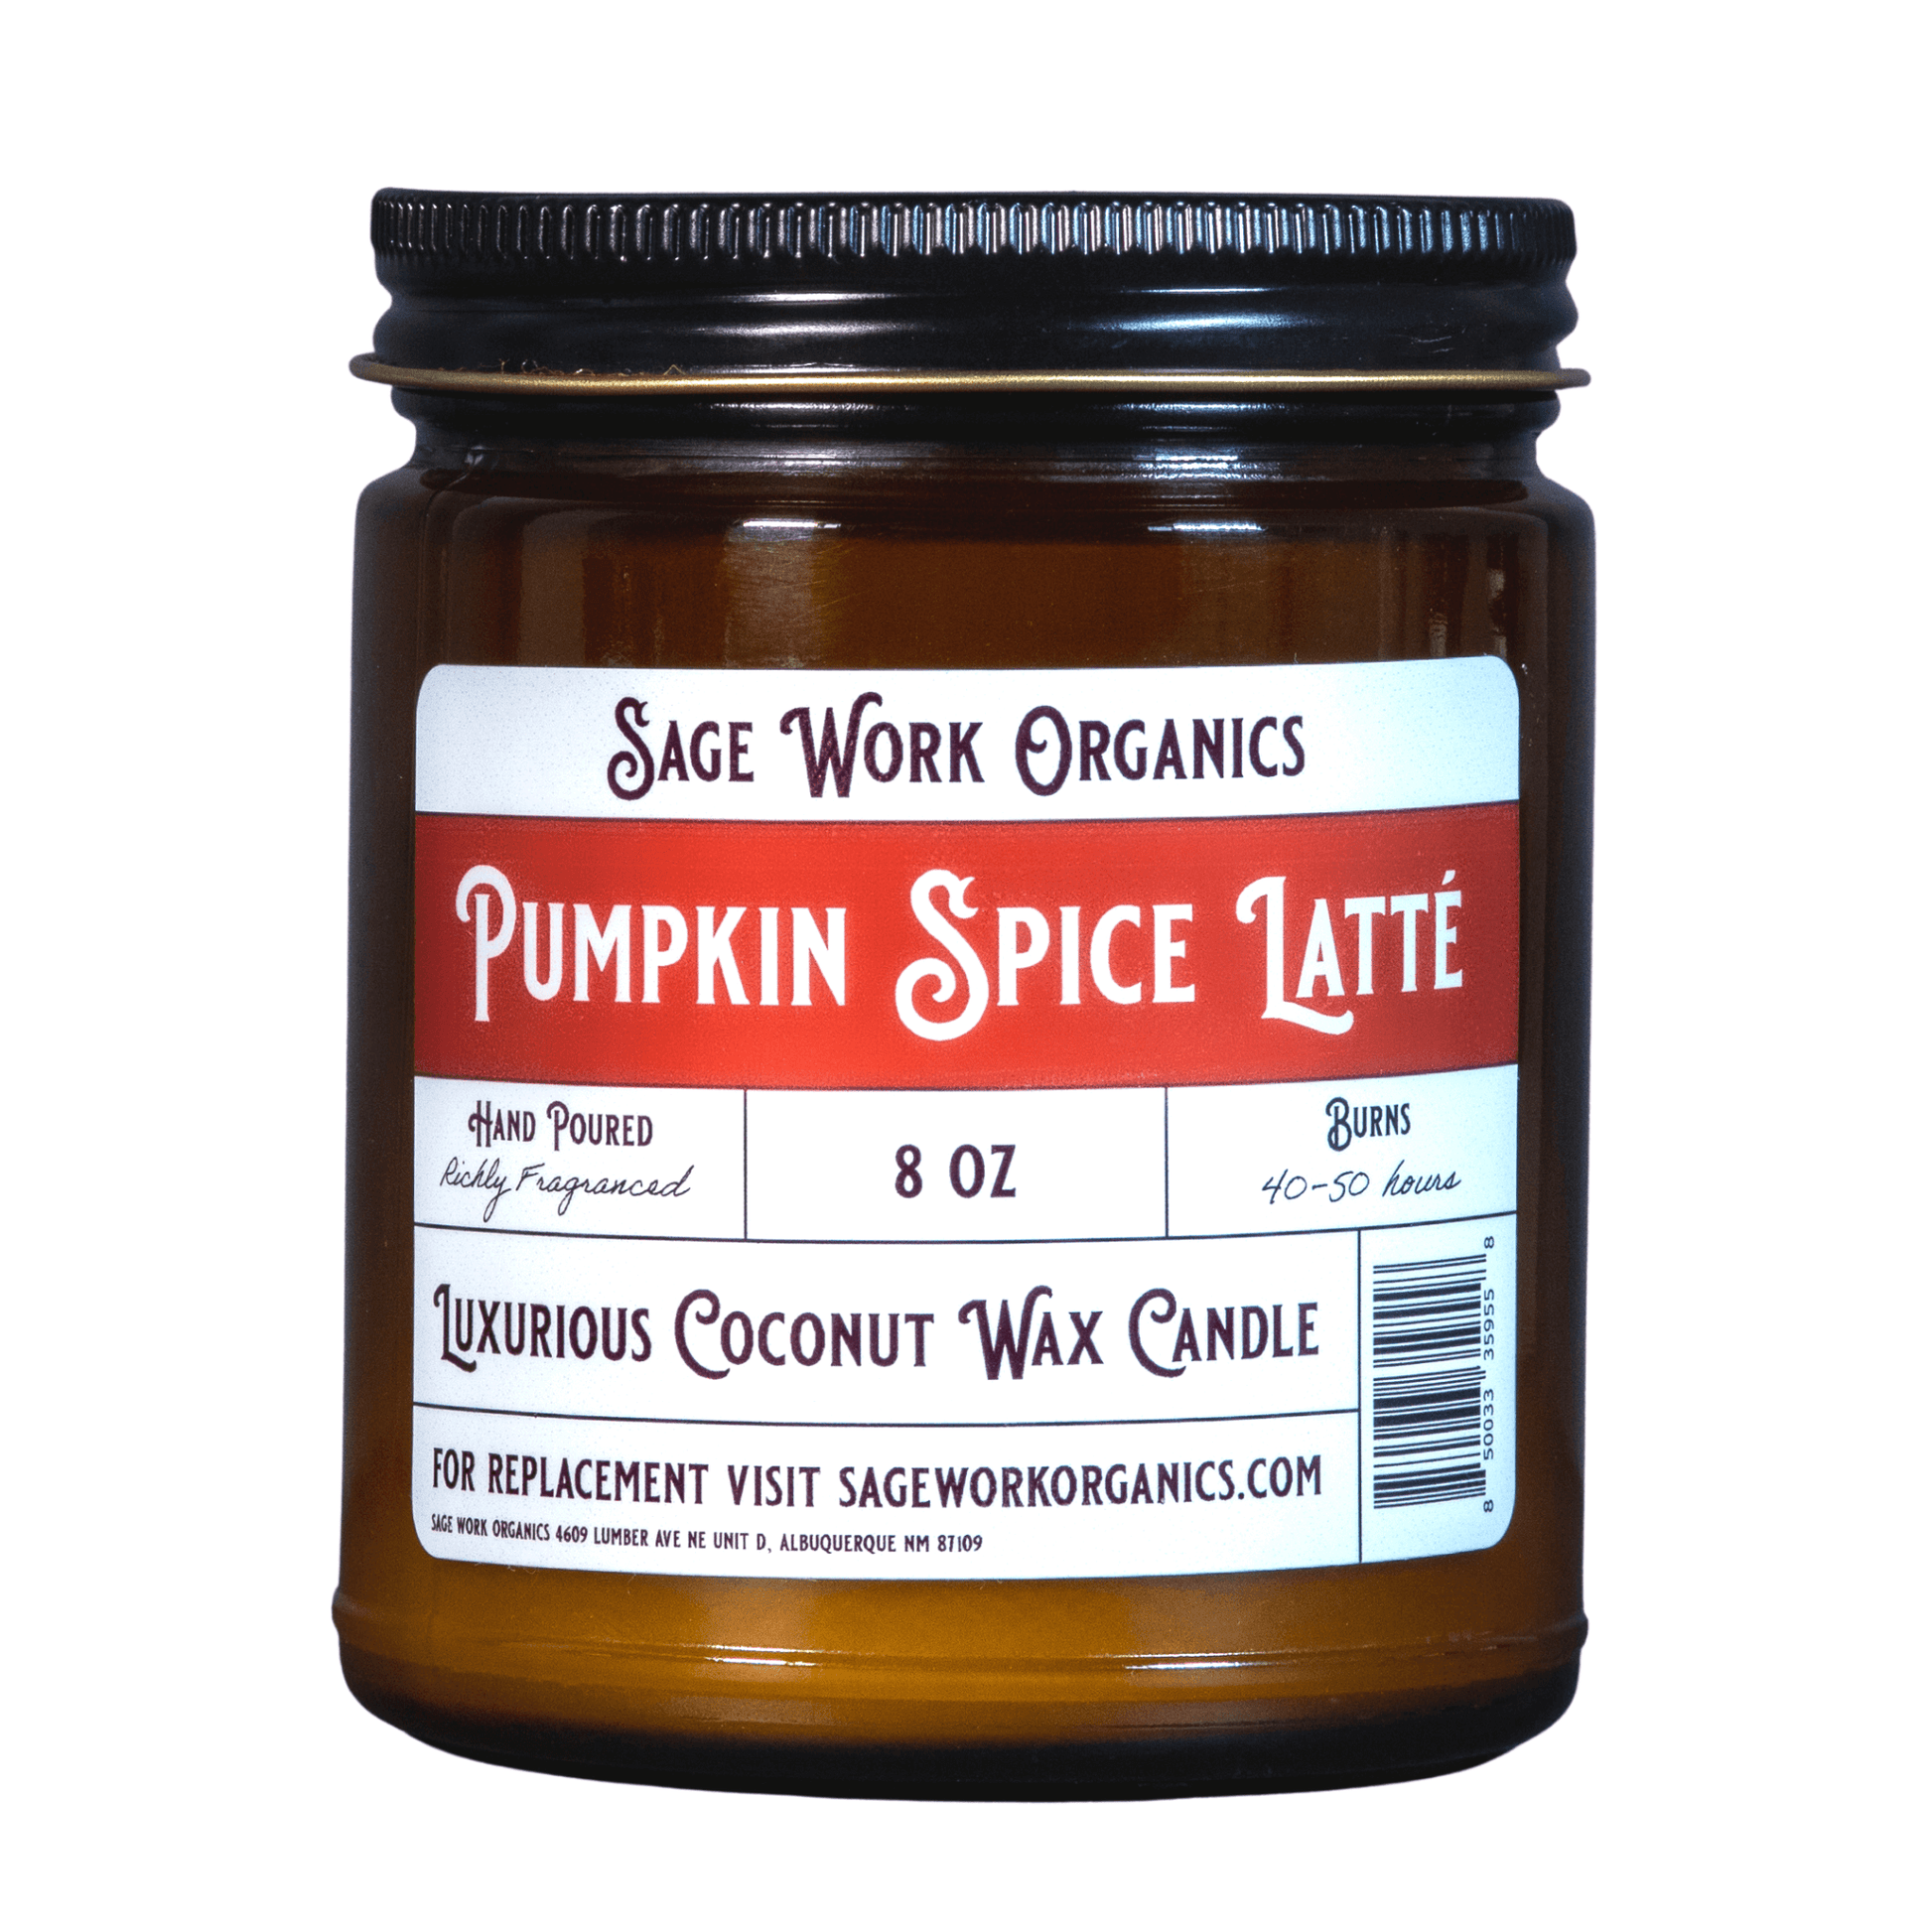 Pumpkin Spice Latte & Mocha Scent Candle with Essential Oils